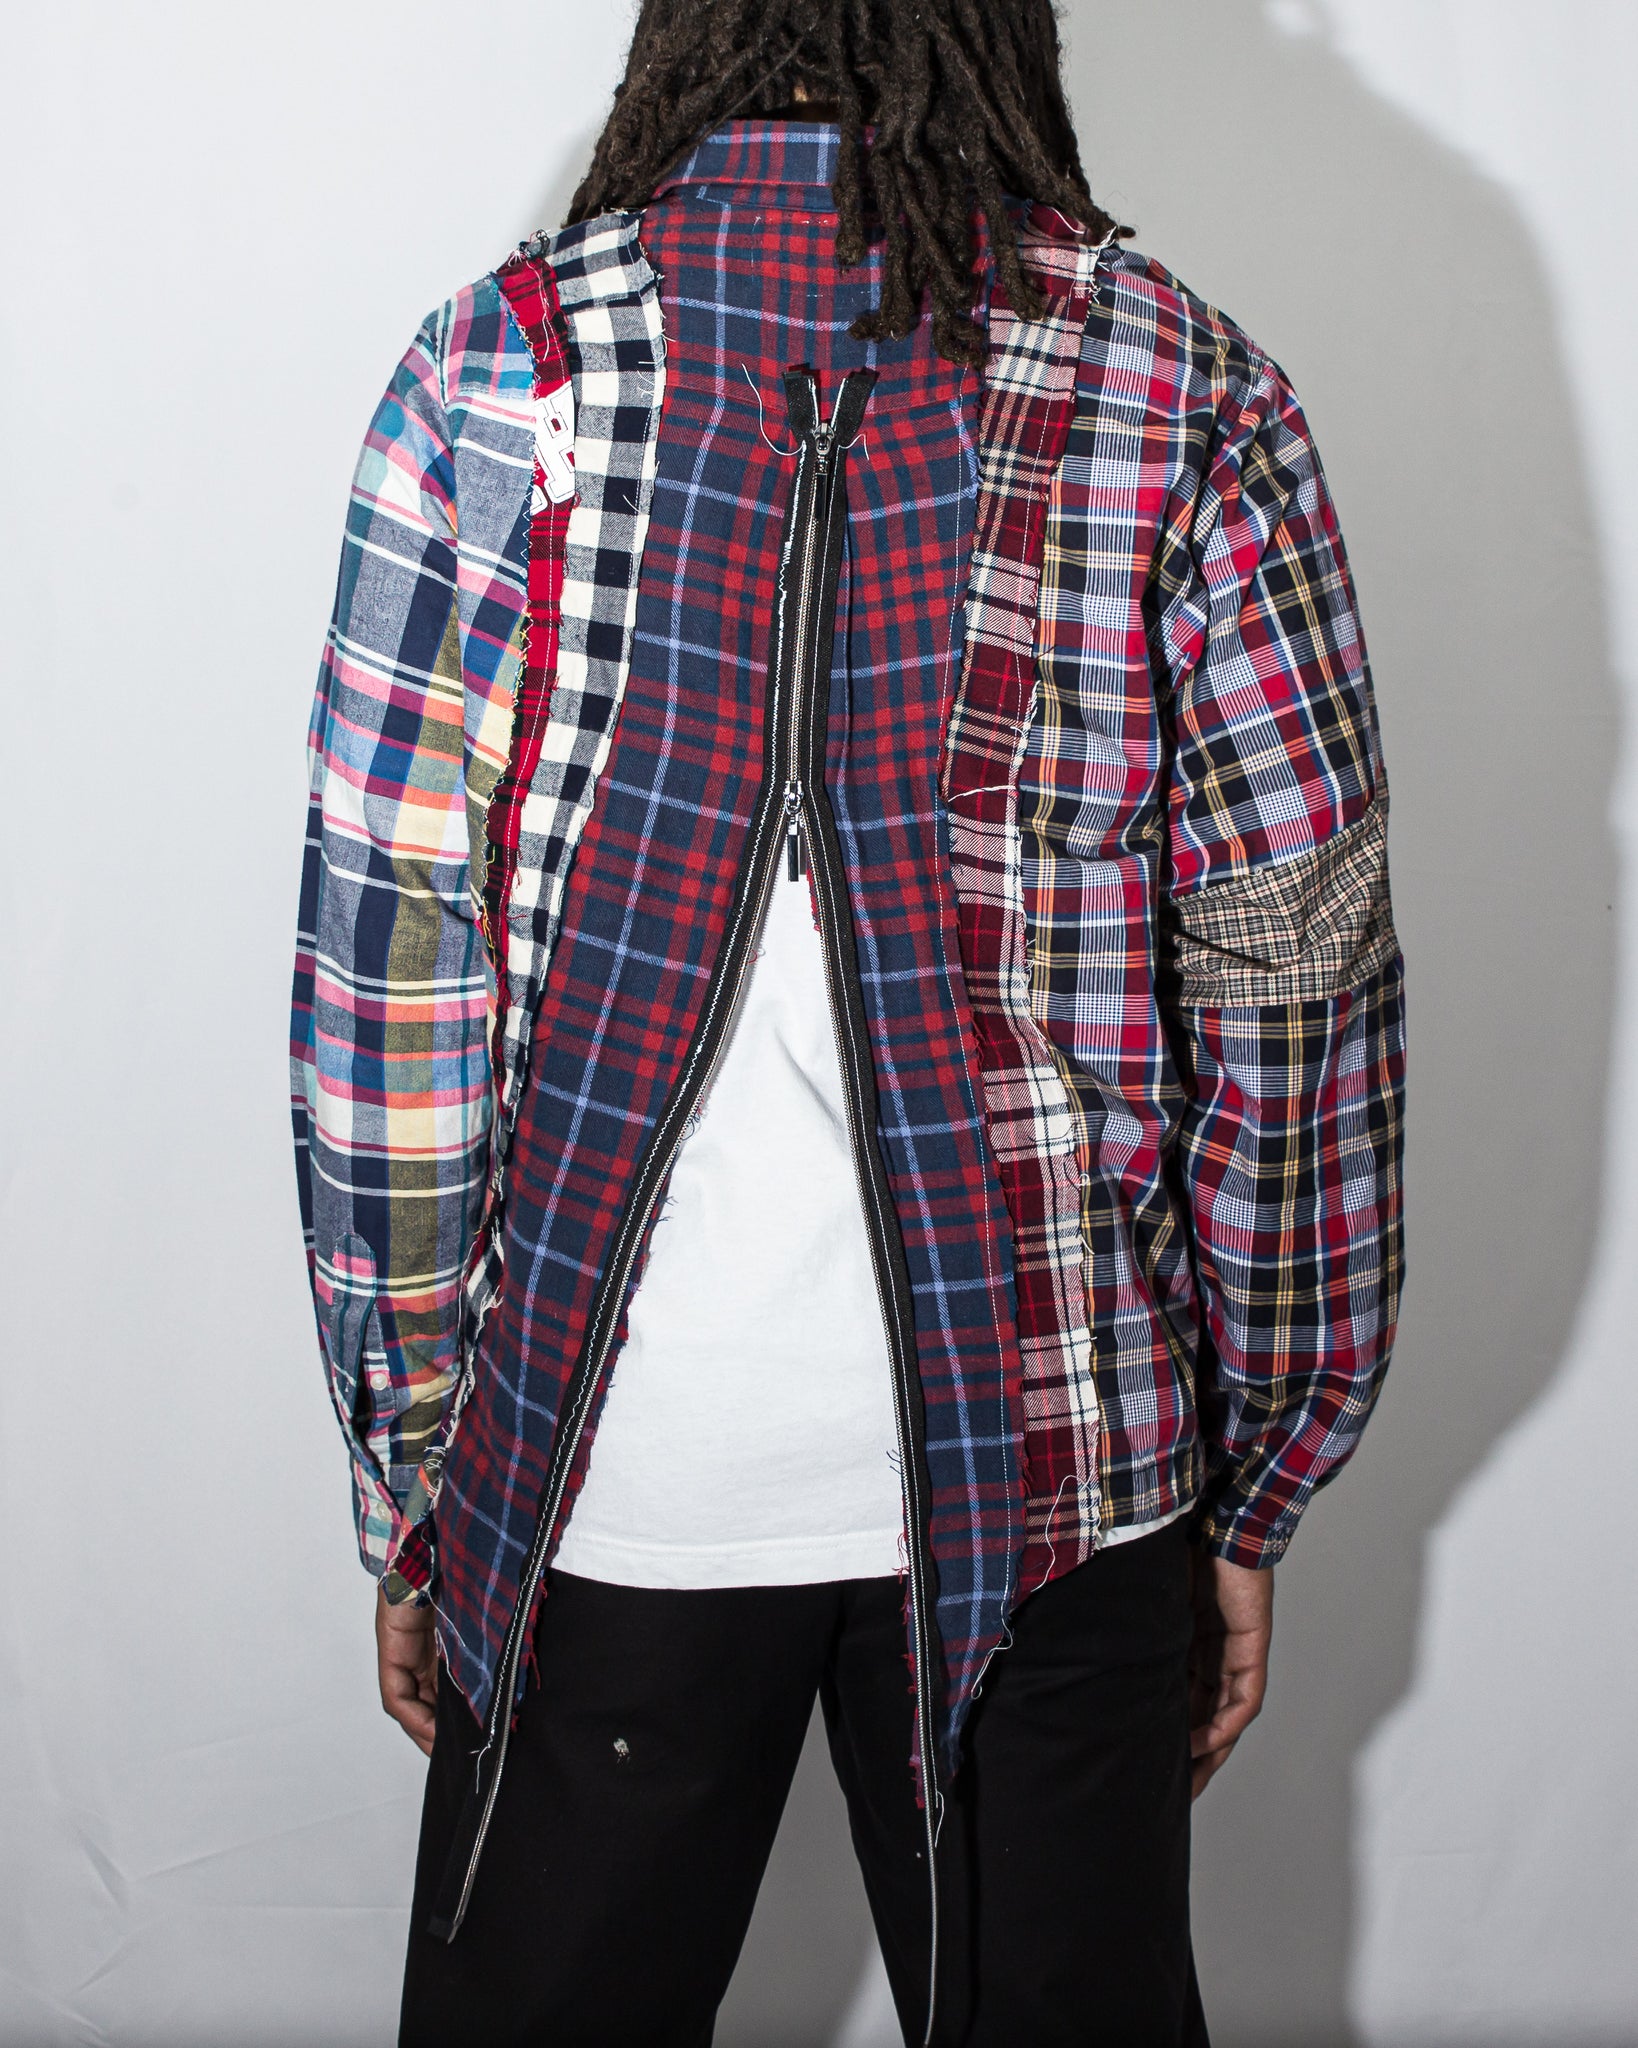 Reconstructed Flannel #5